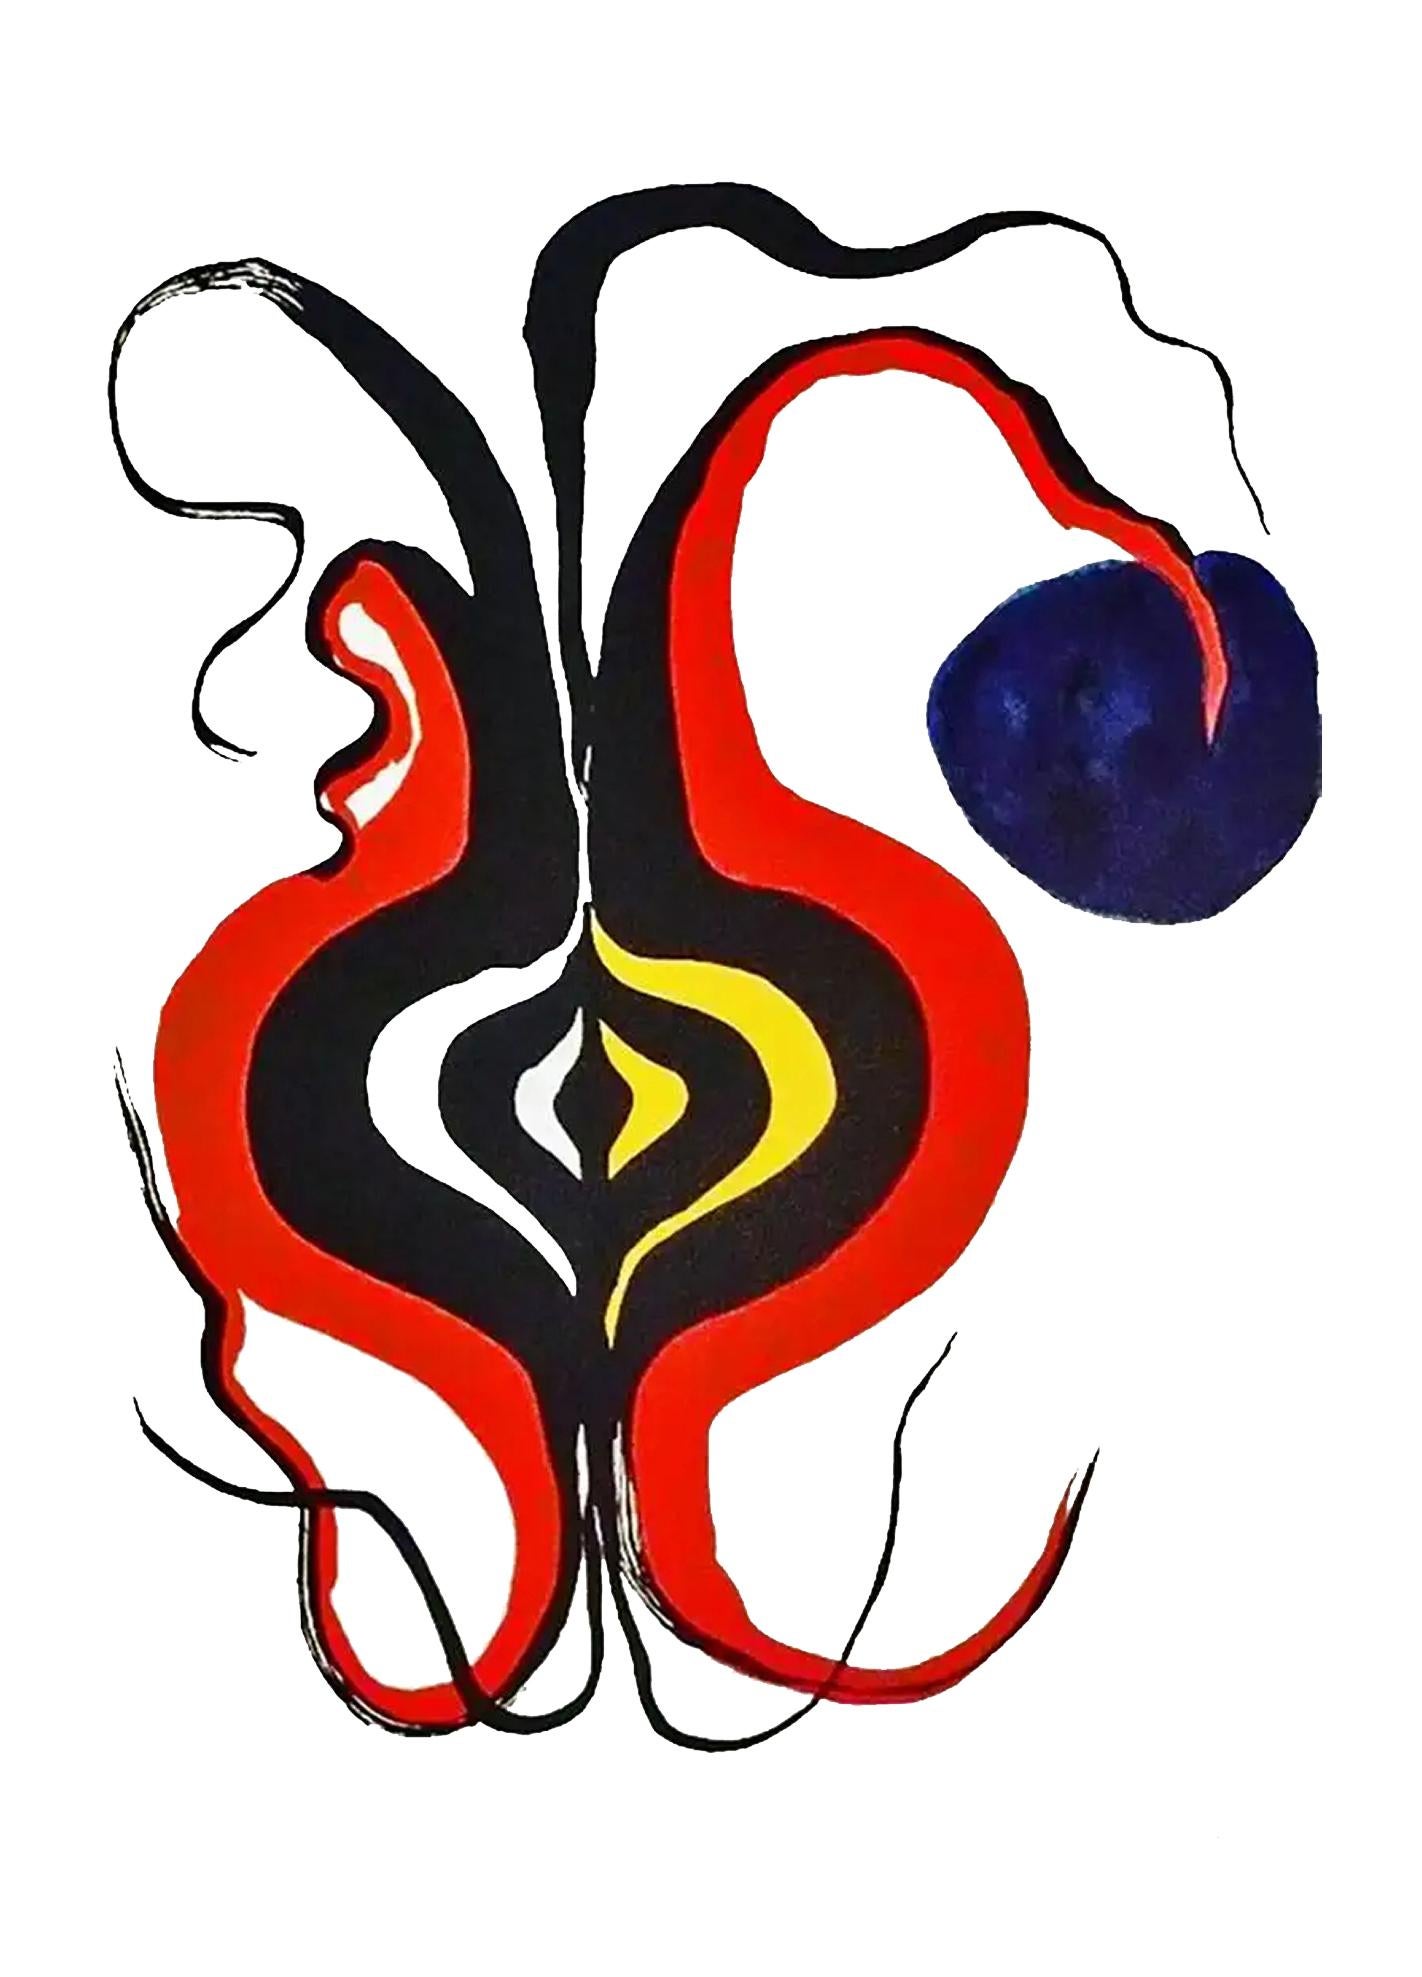 Alexander Calder Lithograph c. 1967 from Derrière le miroir:

Lithograph in colors; 15 x 11 inches.
Very good overall vintage condition; well-preserved.
Unsigned from an edition of unknown.
From: Derrière le miroir. Printed in France.

Derrière le